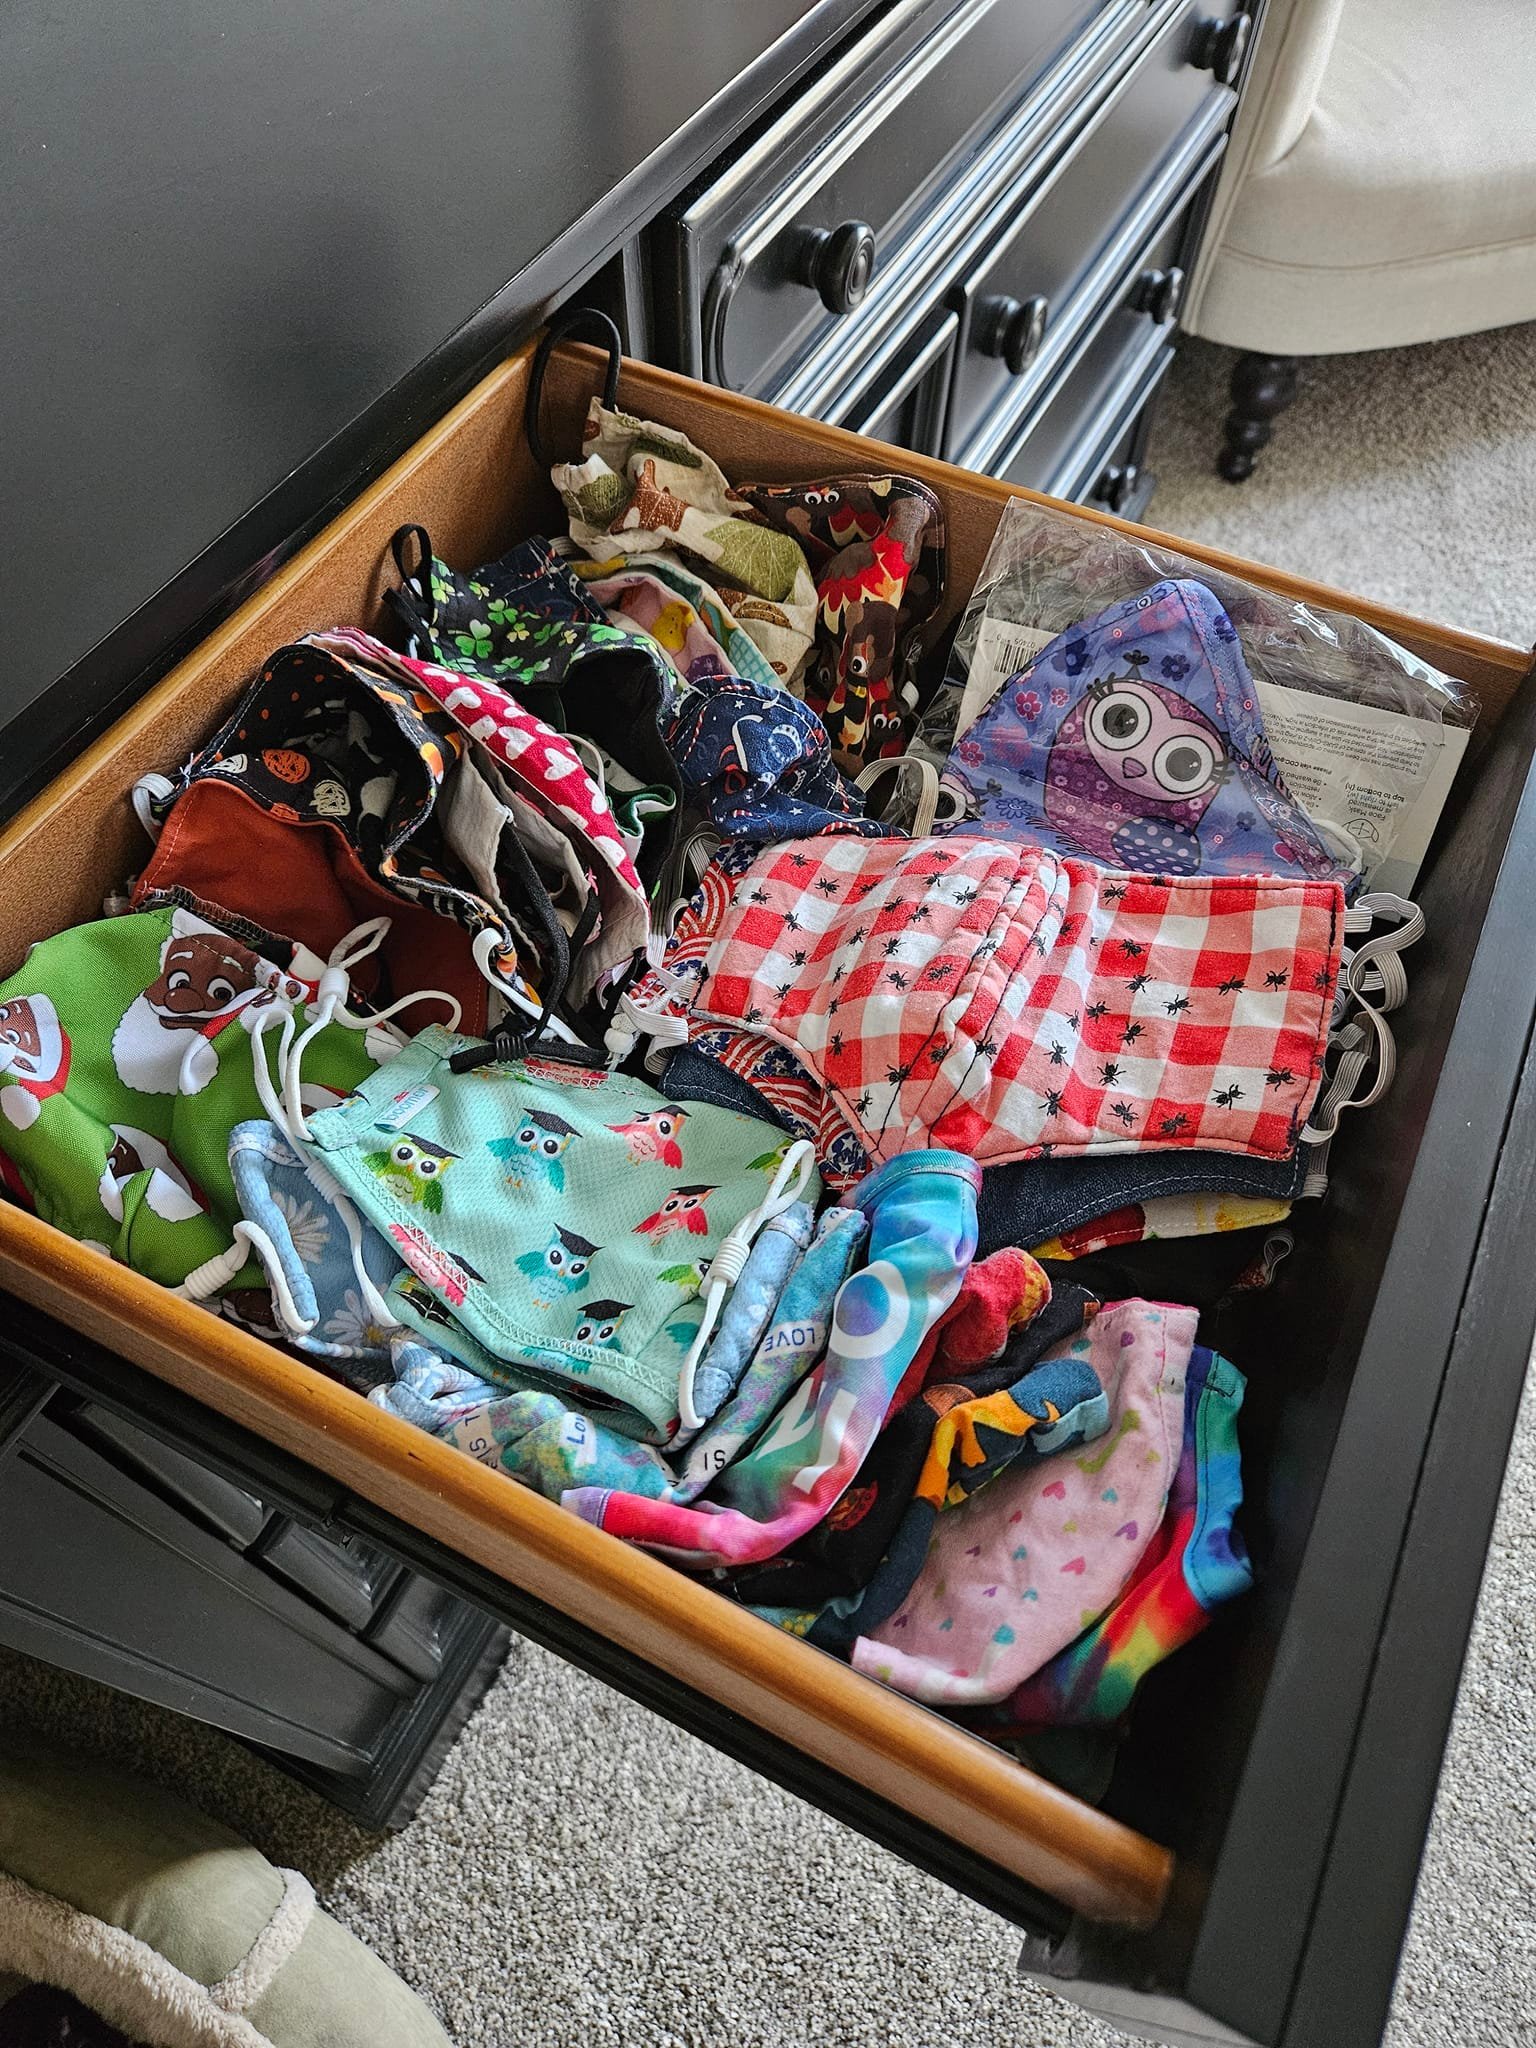 I'm on purge patrol and came across this drawer...

If you know me, you know I will jump on any opportunity to theme something out. 

Masks were a bit of an a** whip for me (being hard of hearing 🦻🏾- I was hurtin' without the lips!), but I sure did